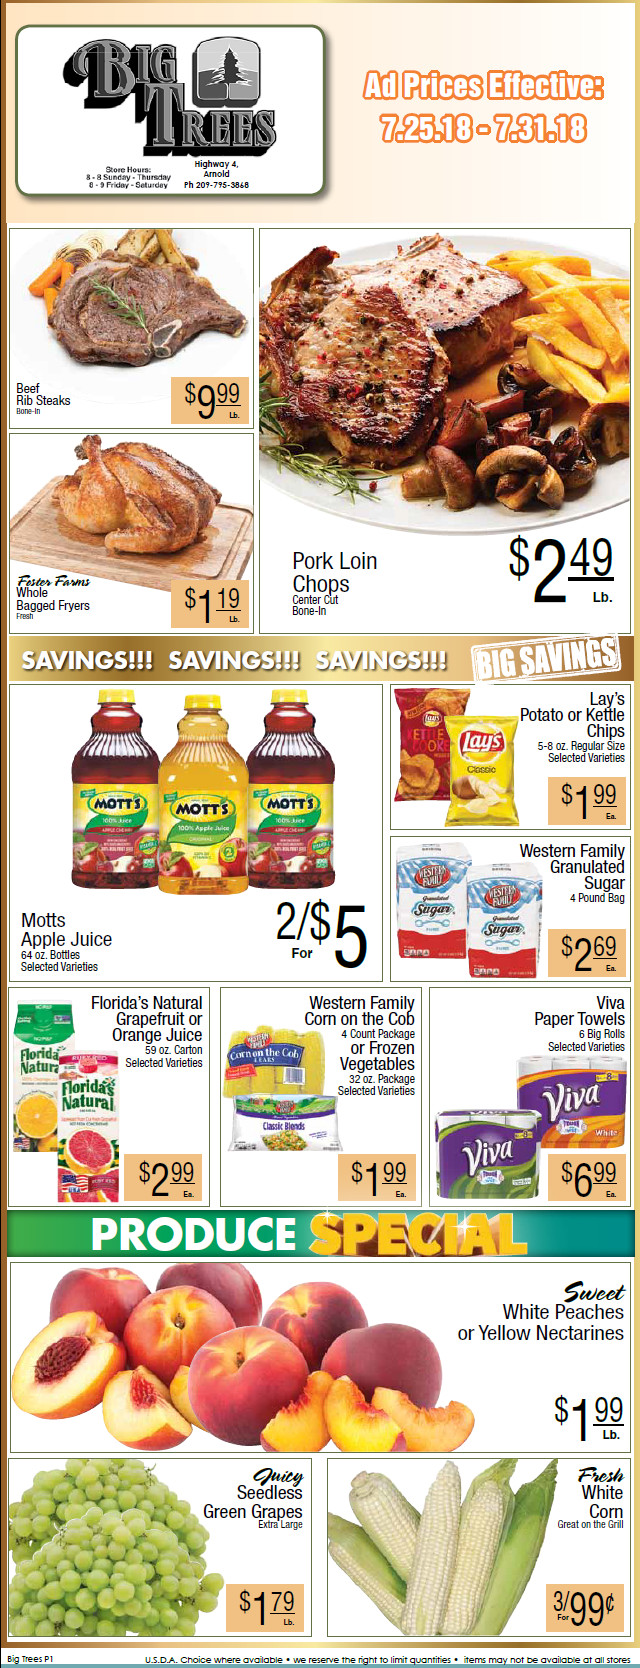 Big Trees Market Weekly Ad & Grocery Specials Through July 31st